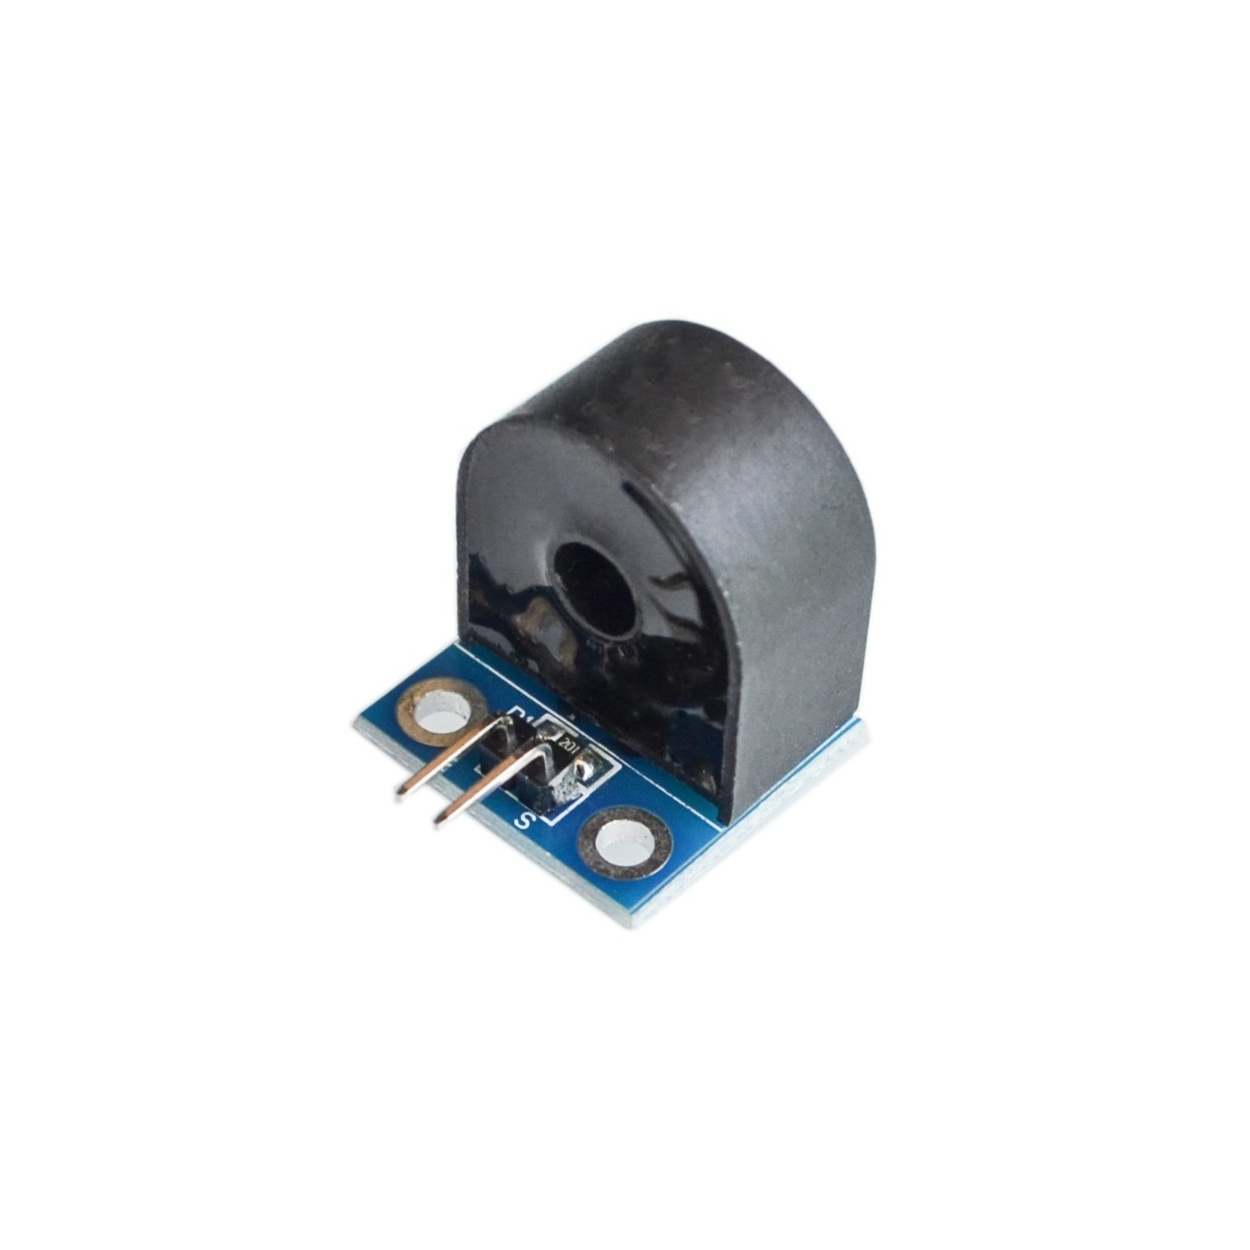 ZMCT103C 5A Current Transformer Breakout Buy Online India